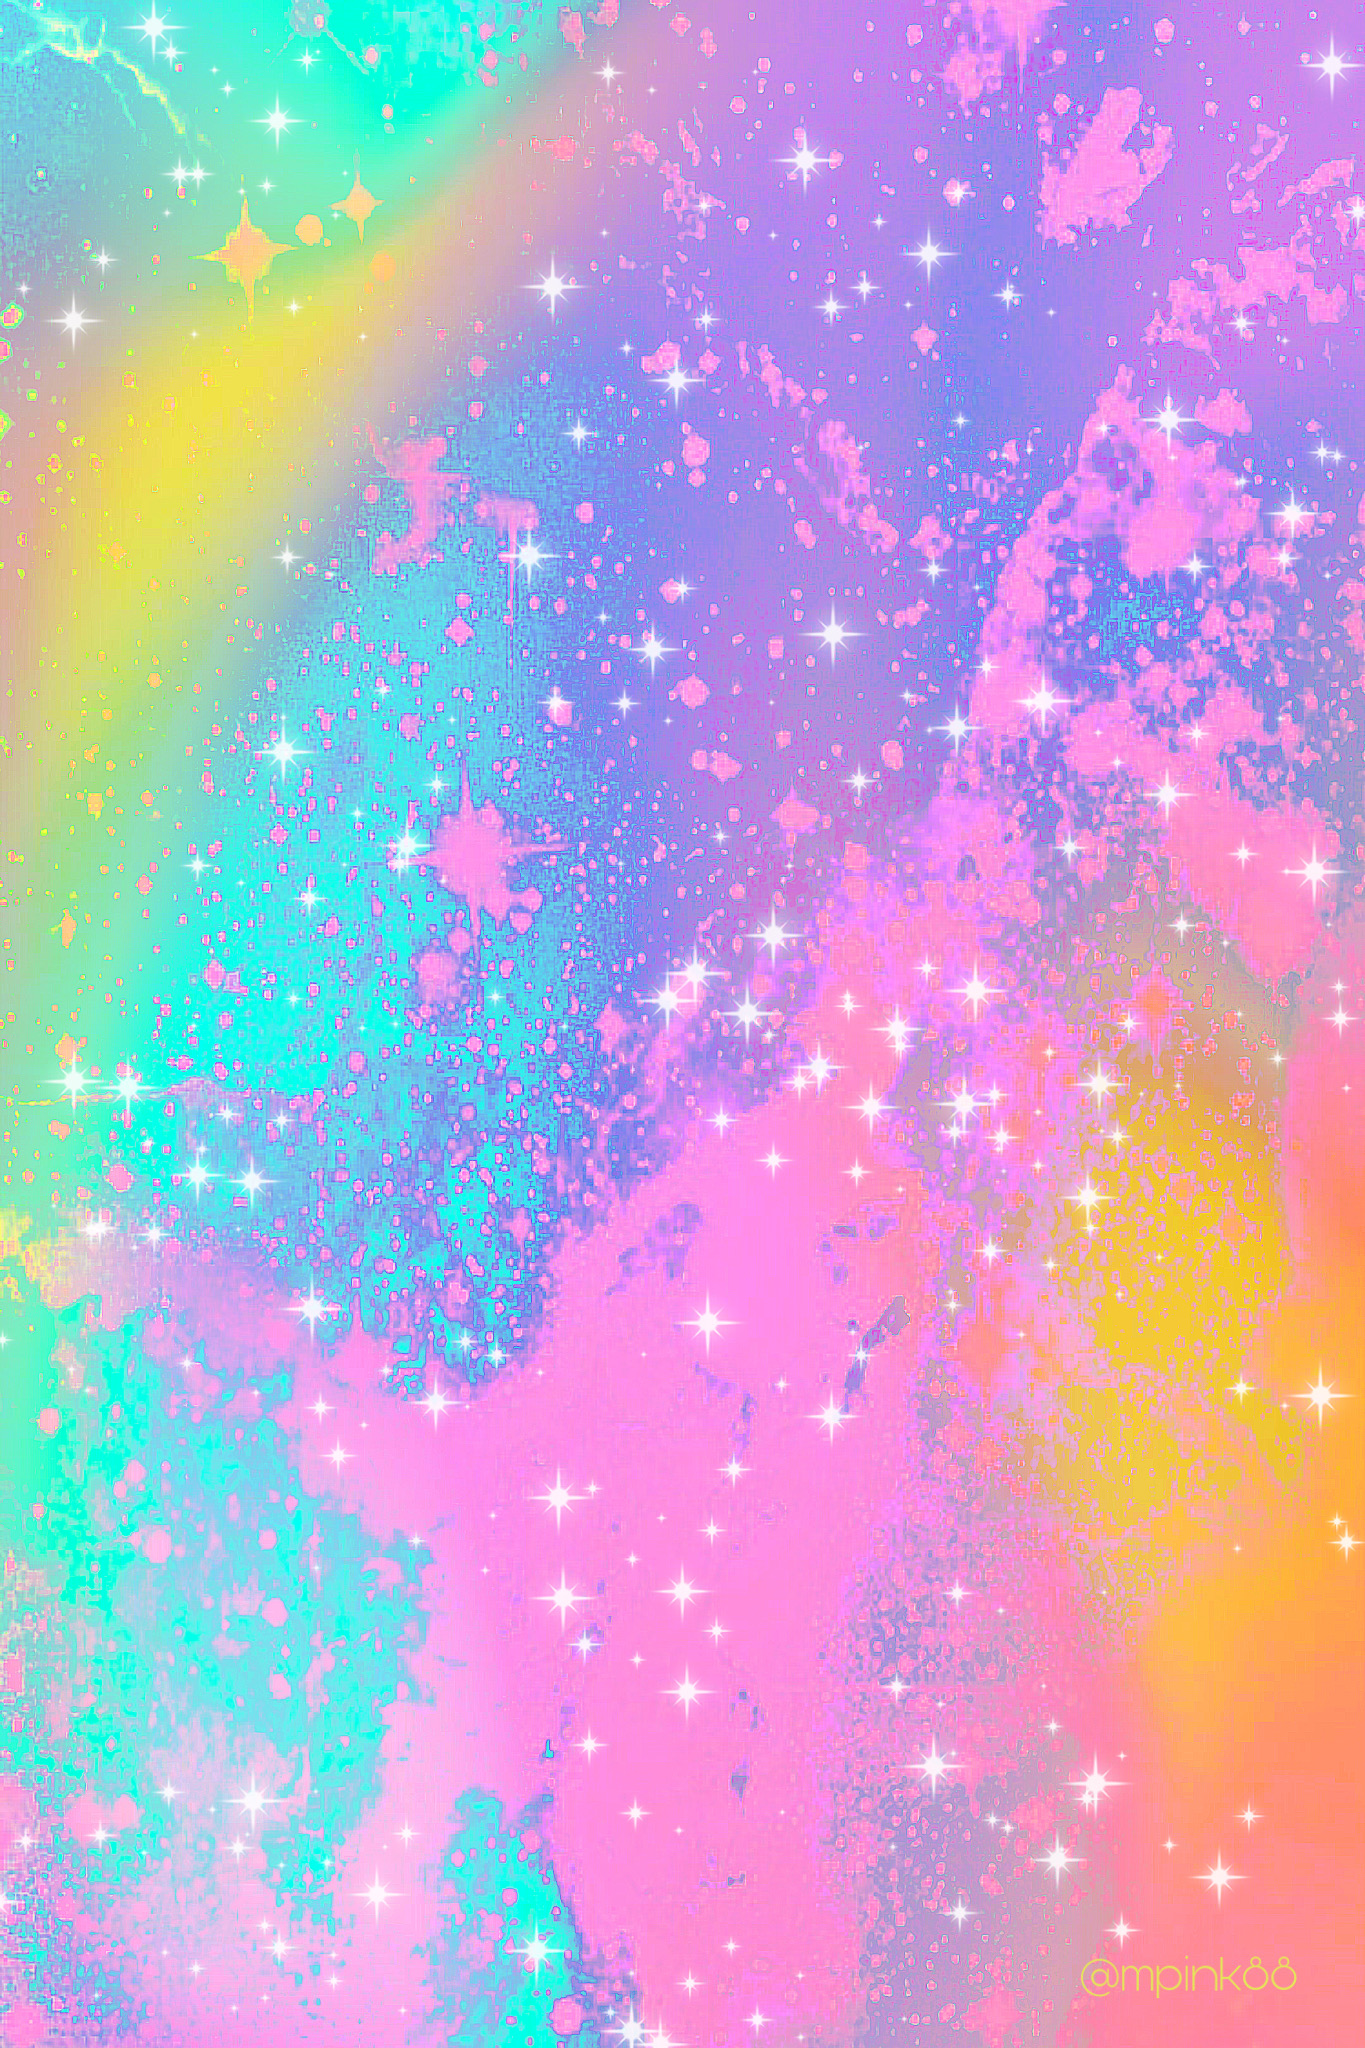 freetoedit glitter sparkles galaxy image by @misspink88